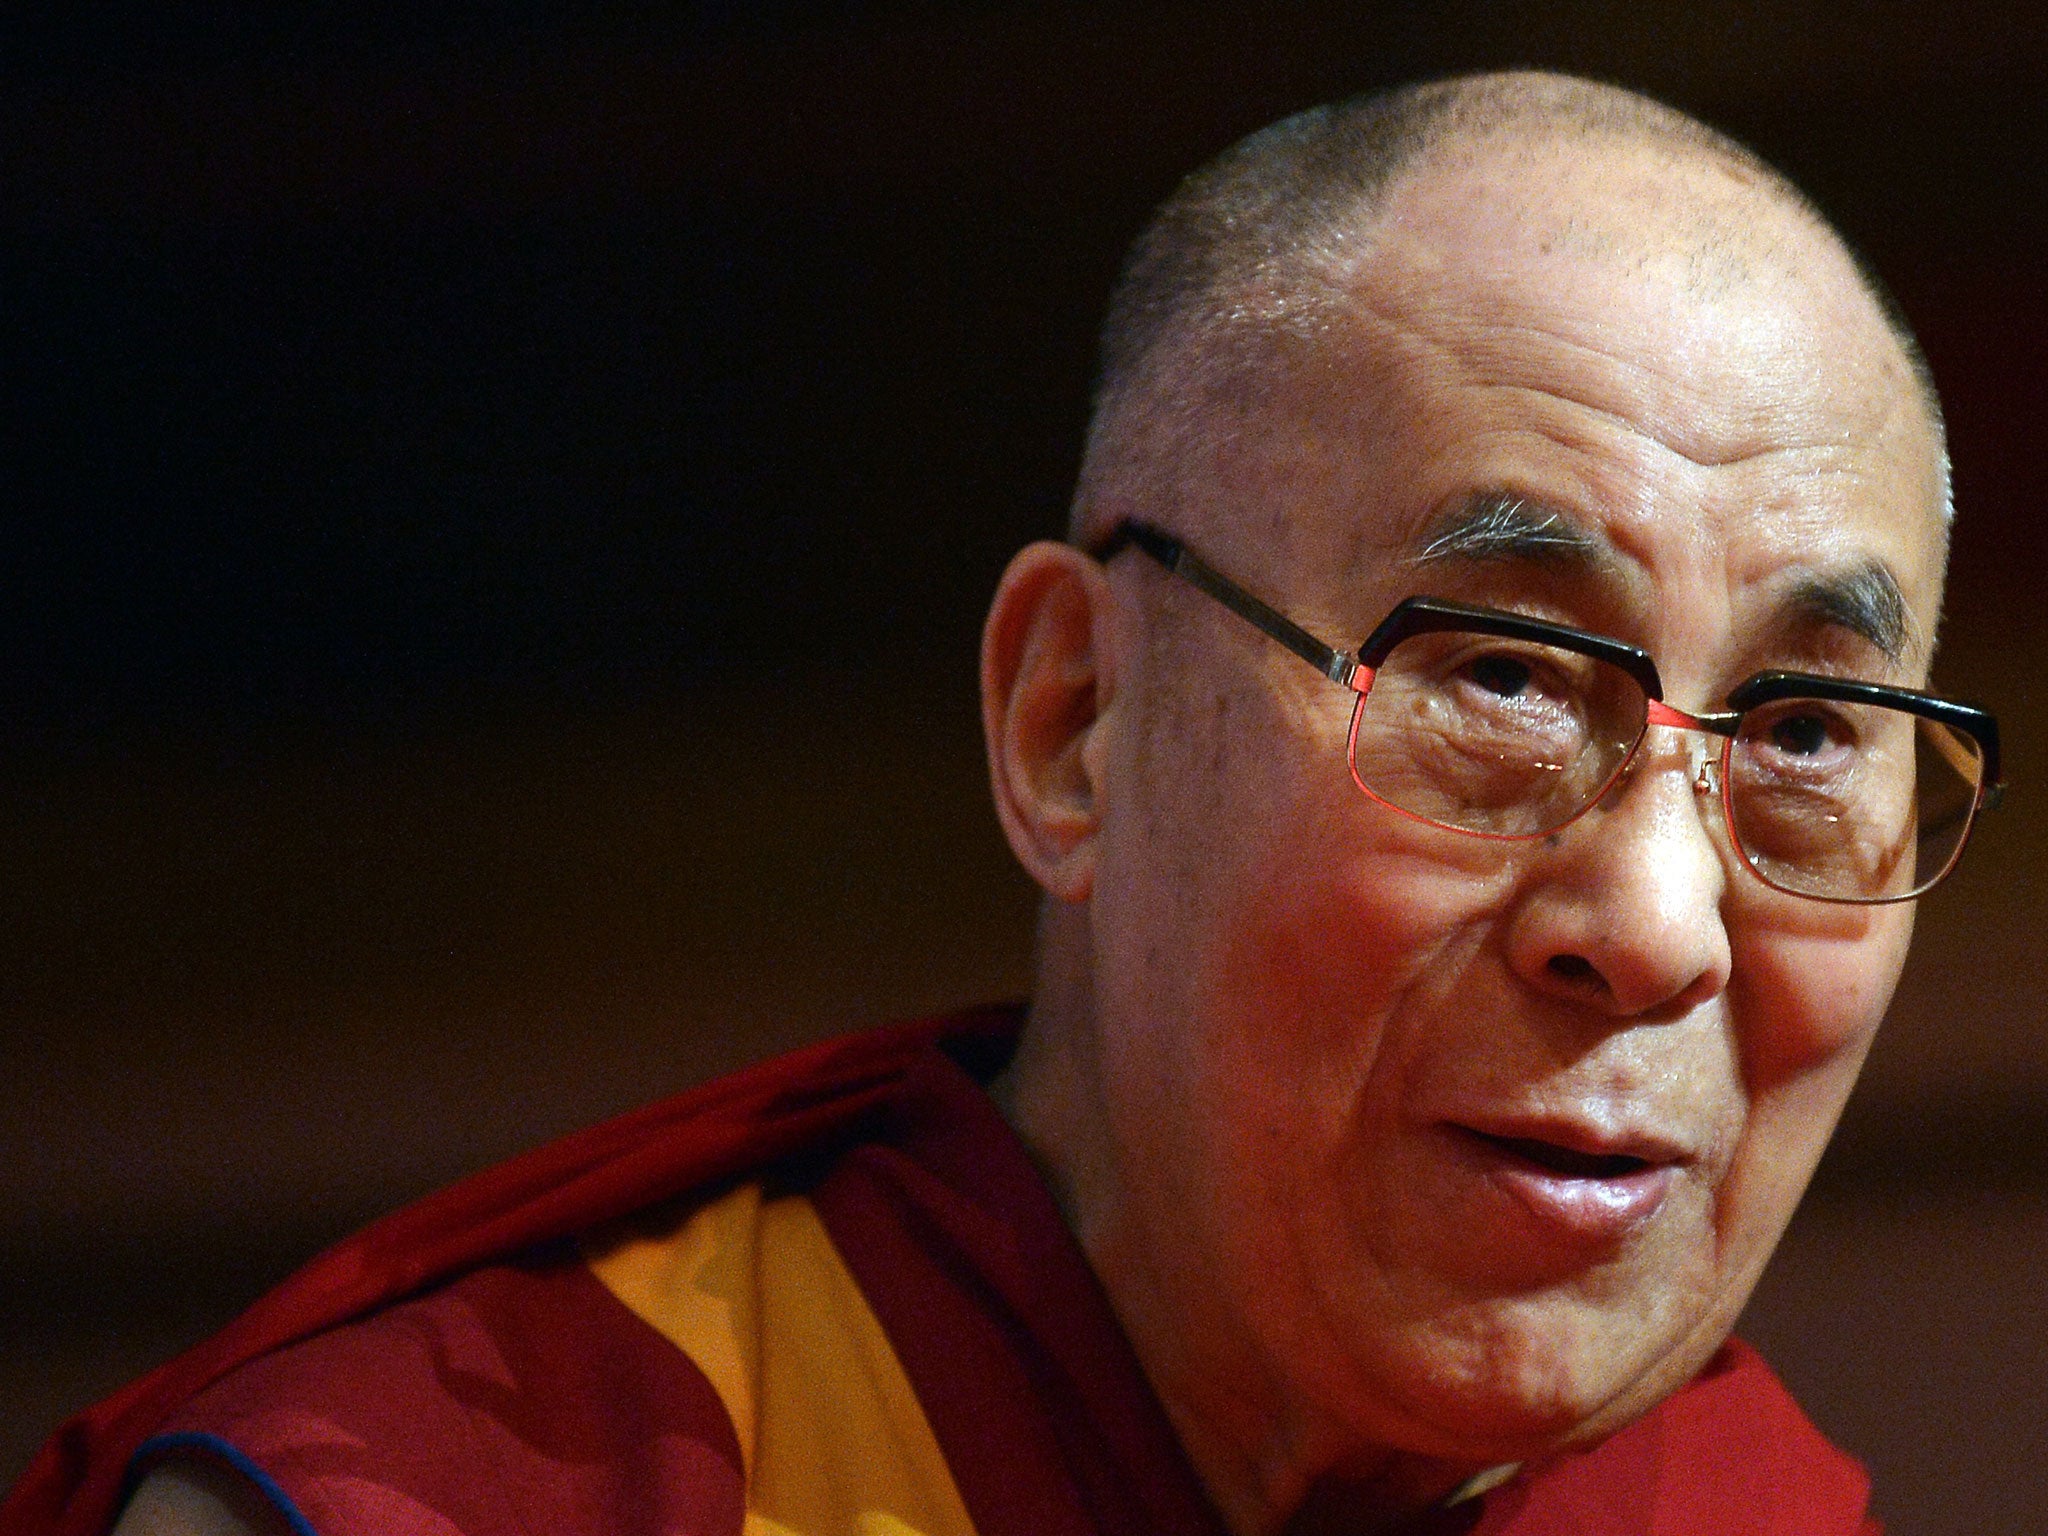 The Dalai Lama pictured during the 14th World Summit of Nobel Peace Laureates in Rome